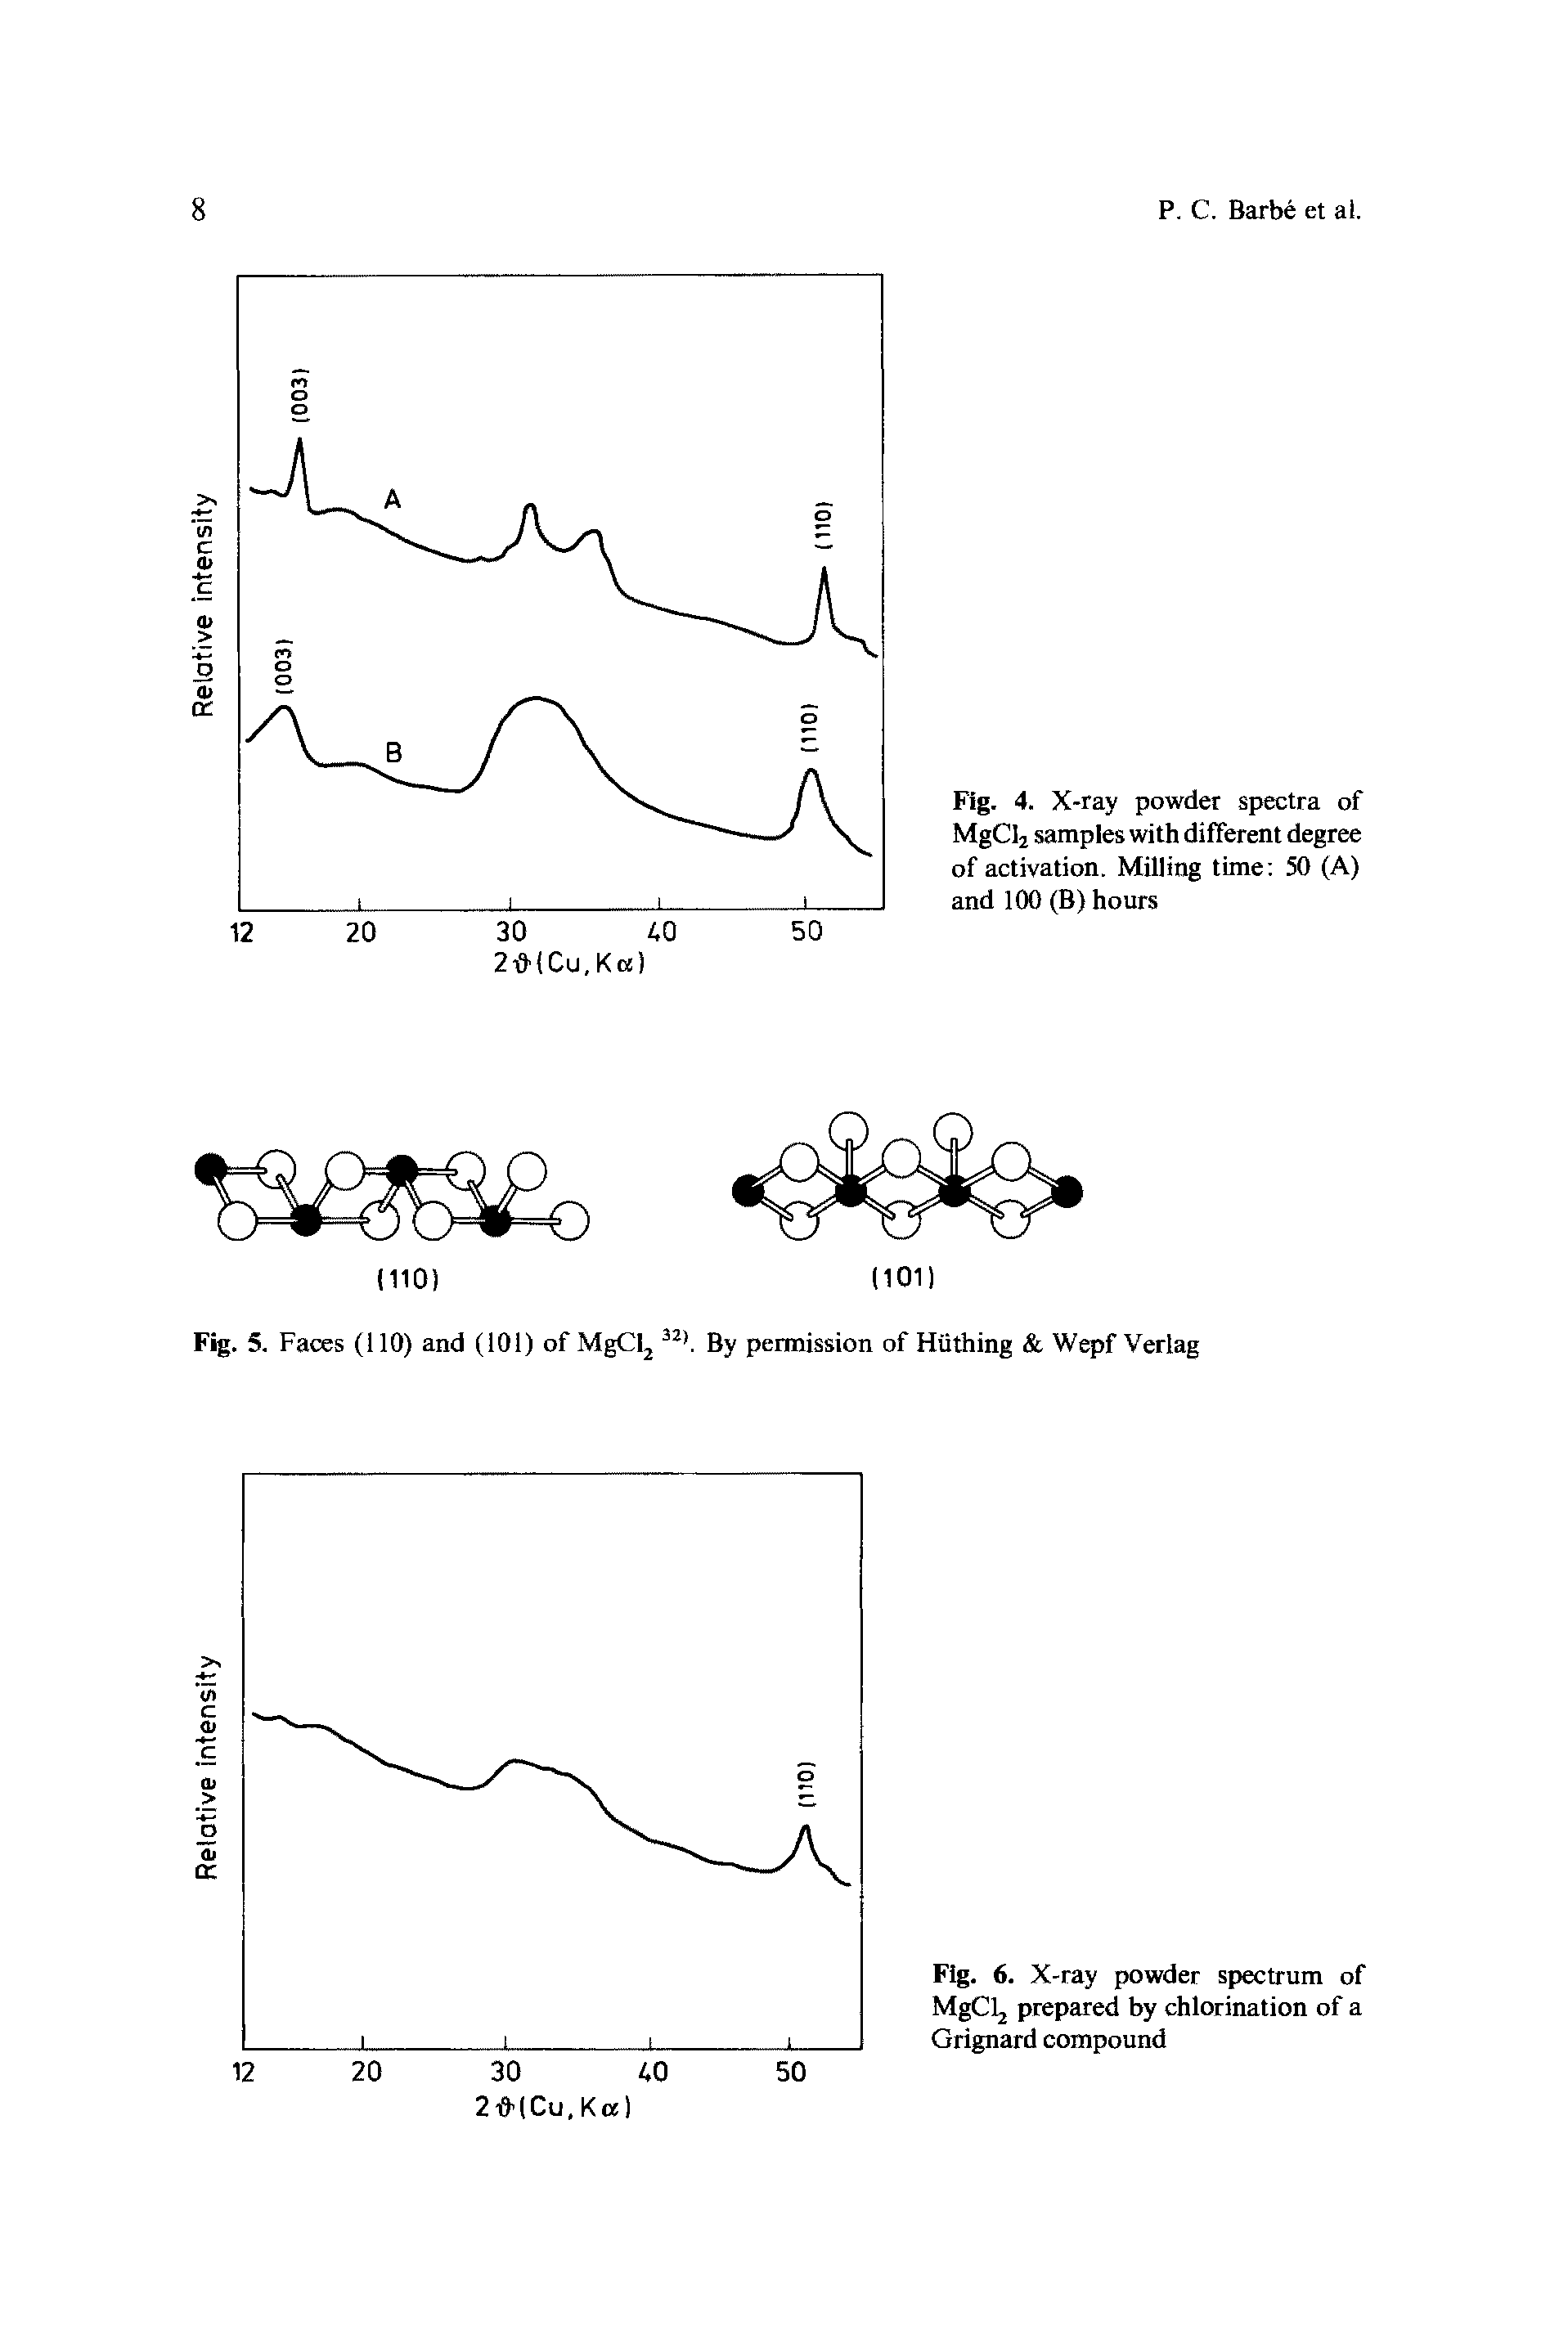 Fig. 4. X -ray powder spectra of MgCl2 samples with different degree of activation. Milling time 50 (A) and 100 (B) hours...